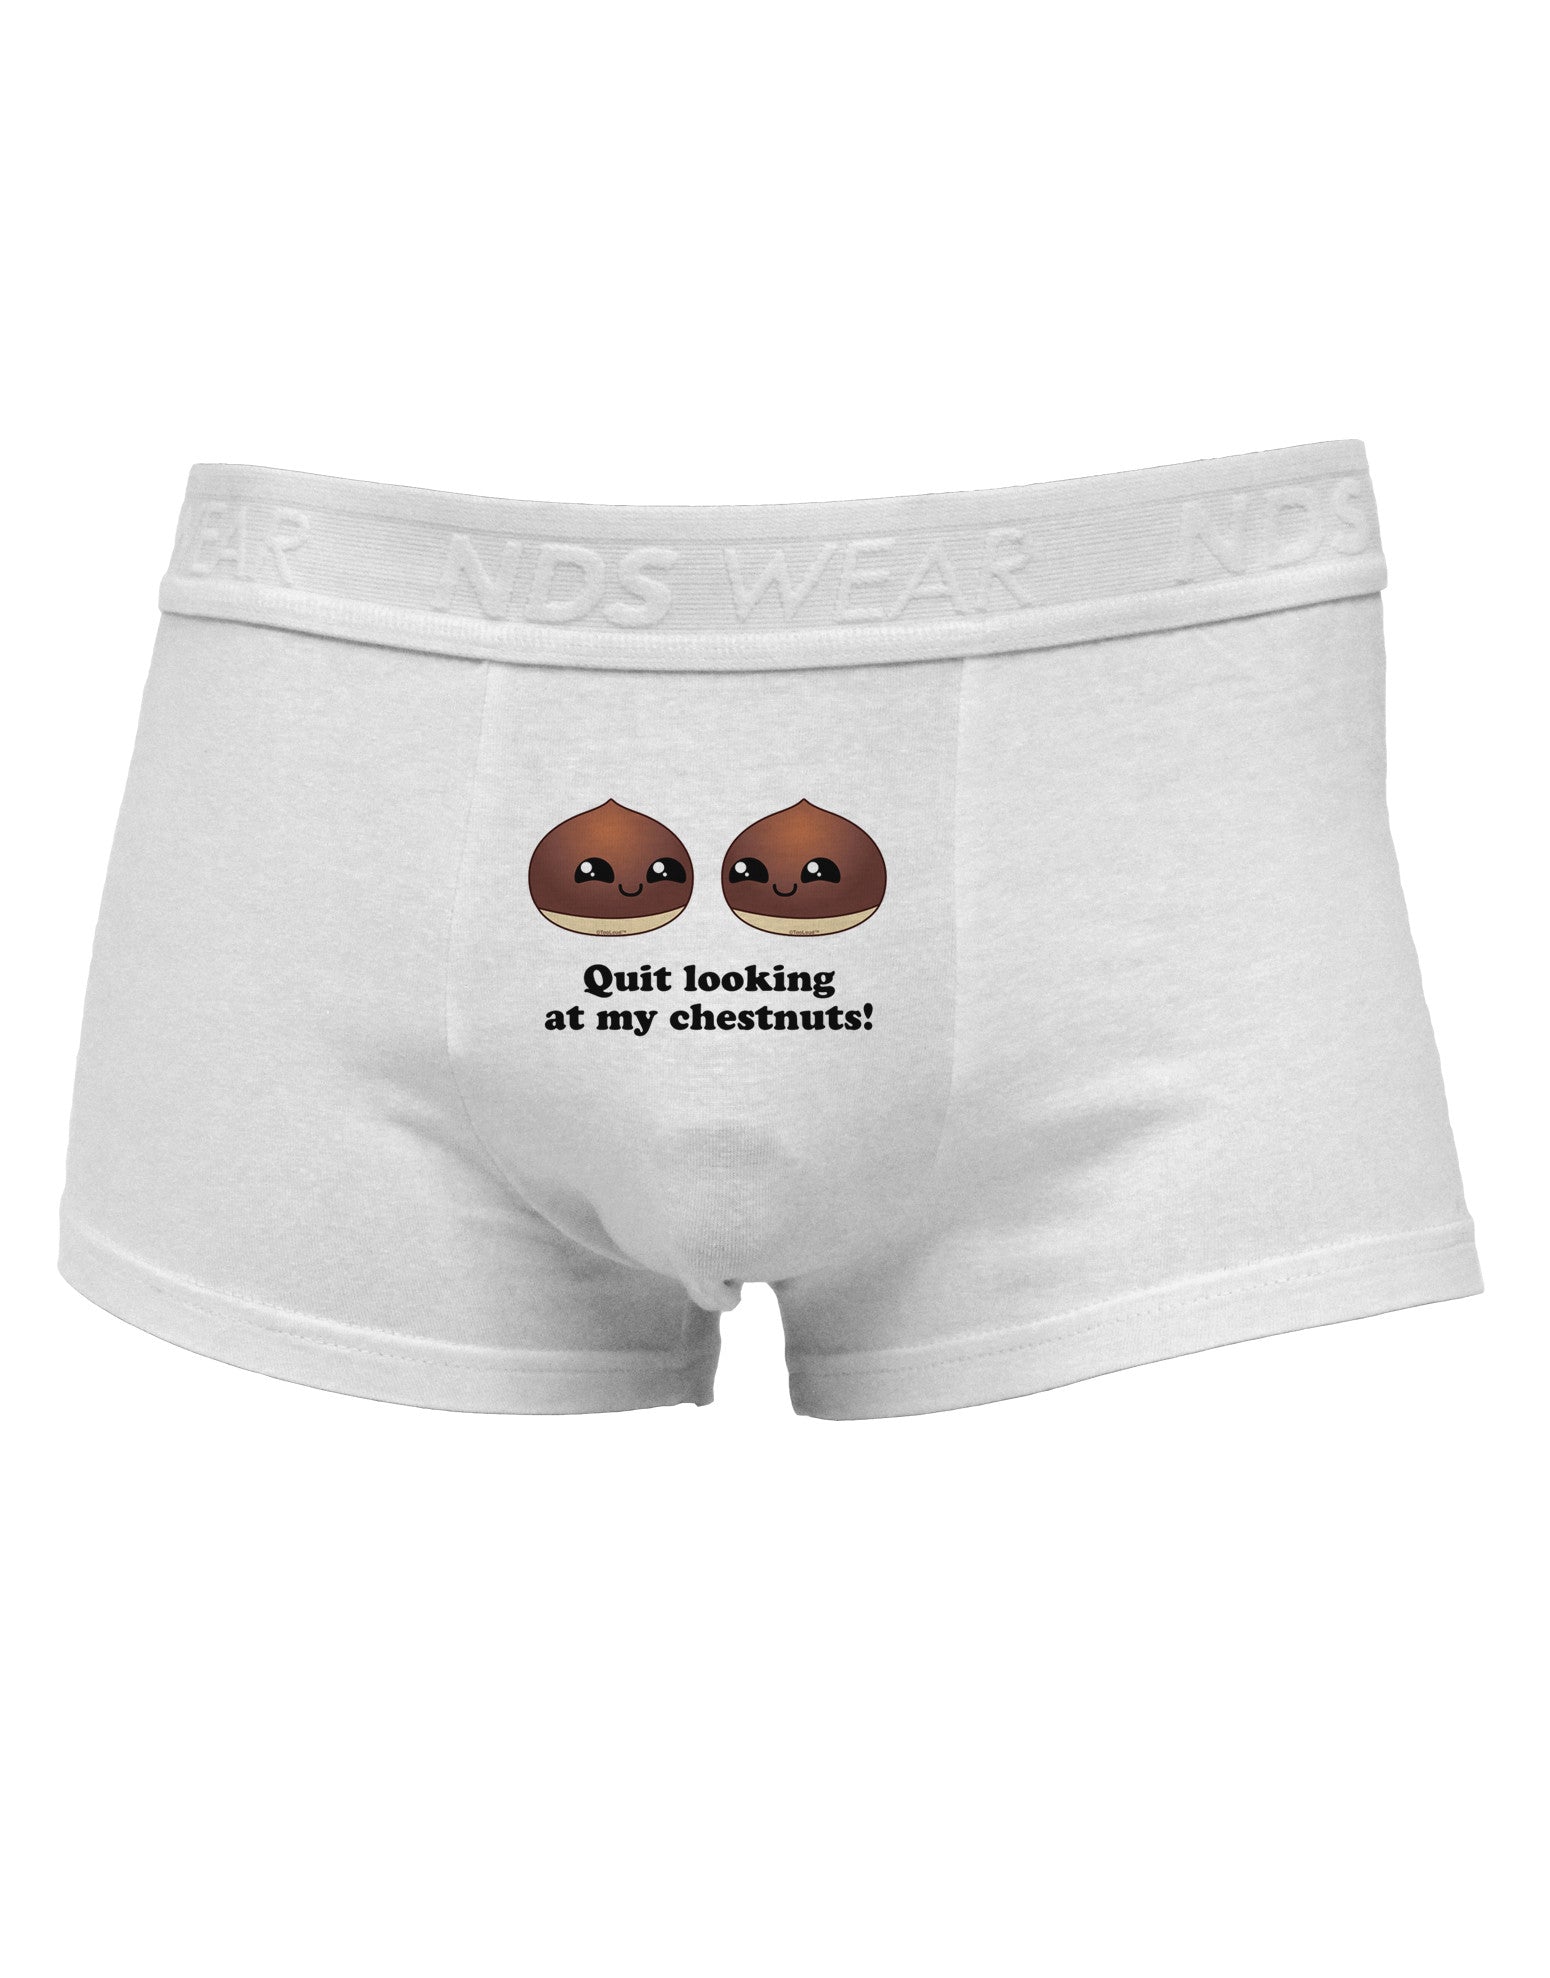 Quit Looking At My Chestnuts - Funny Mens Cotton Trunk Underwear - Davson  Sales